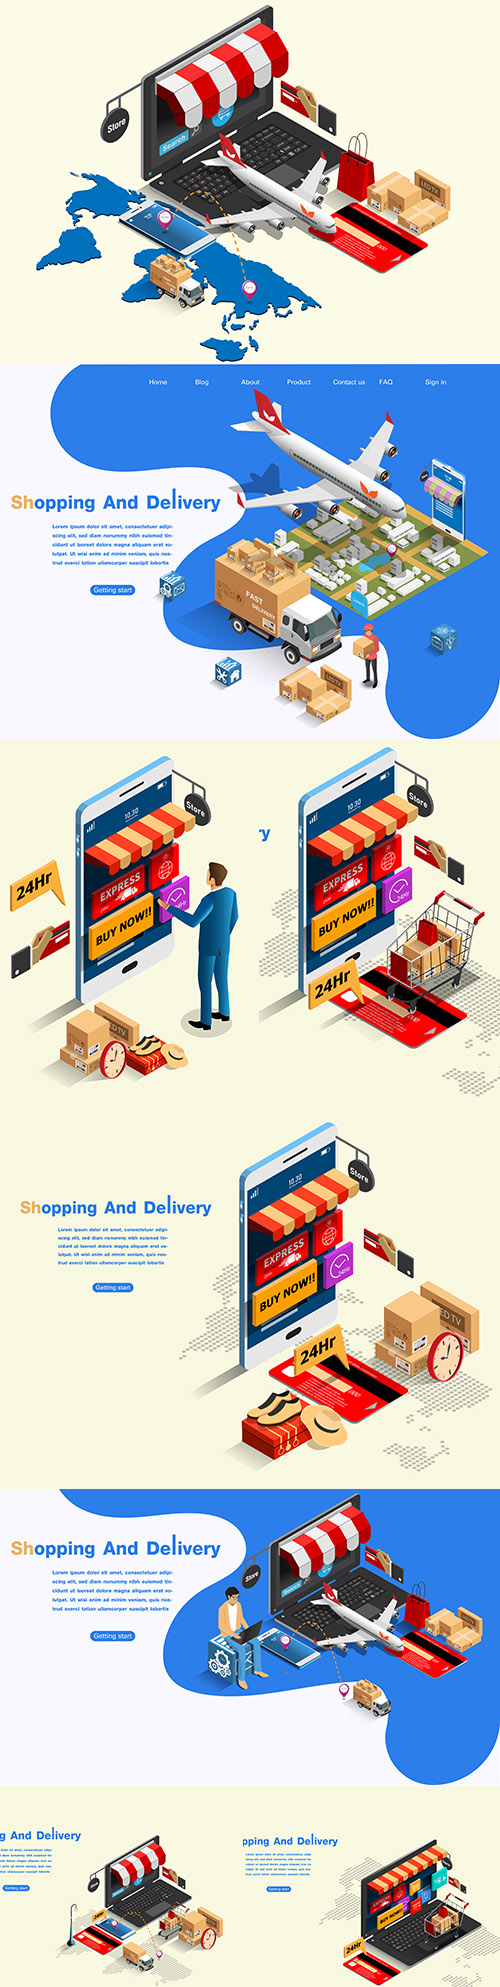 Shopping and shipping online isometric illustration
